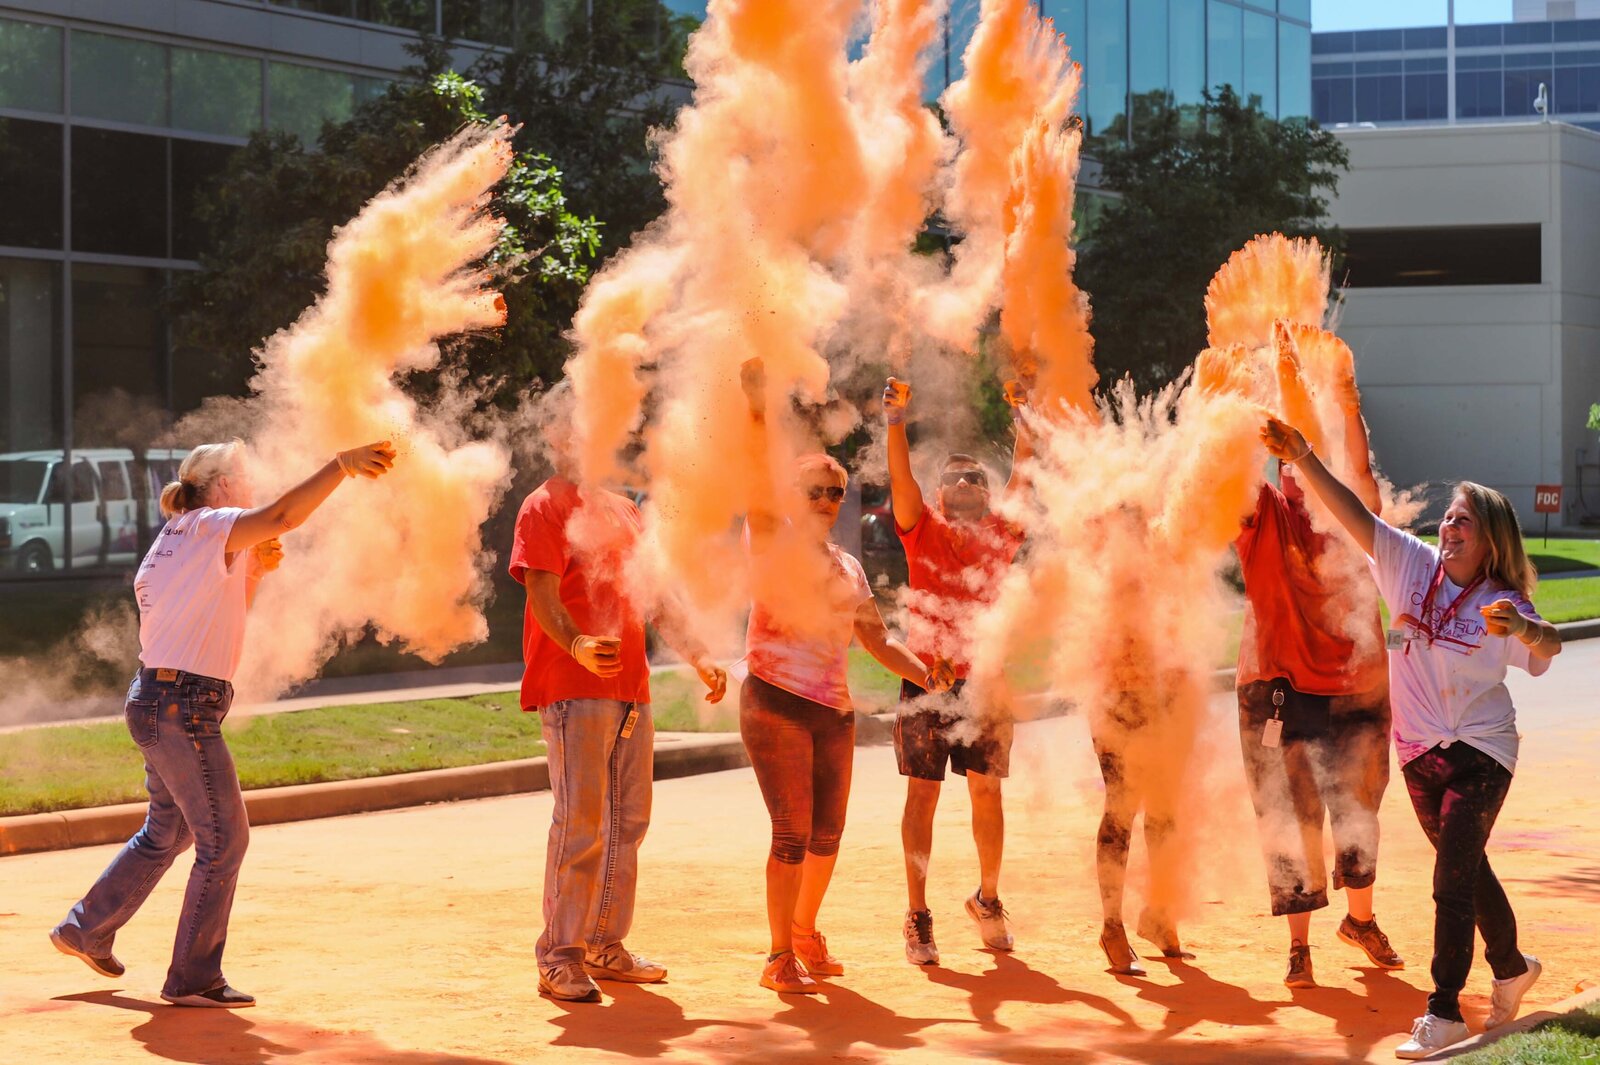 Halliburton employees raise funds for MD Anderson Cancer Center, St. Jude's Children's Research Hospital and Camp Quality during color run event.